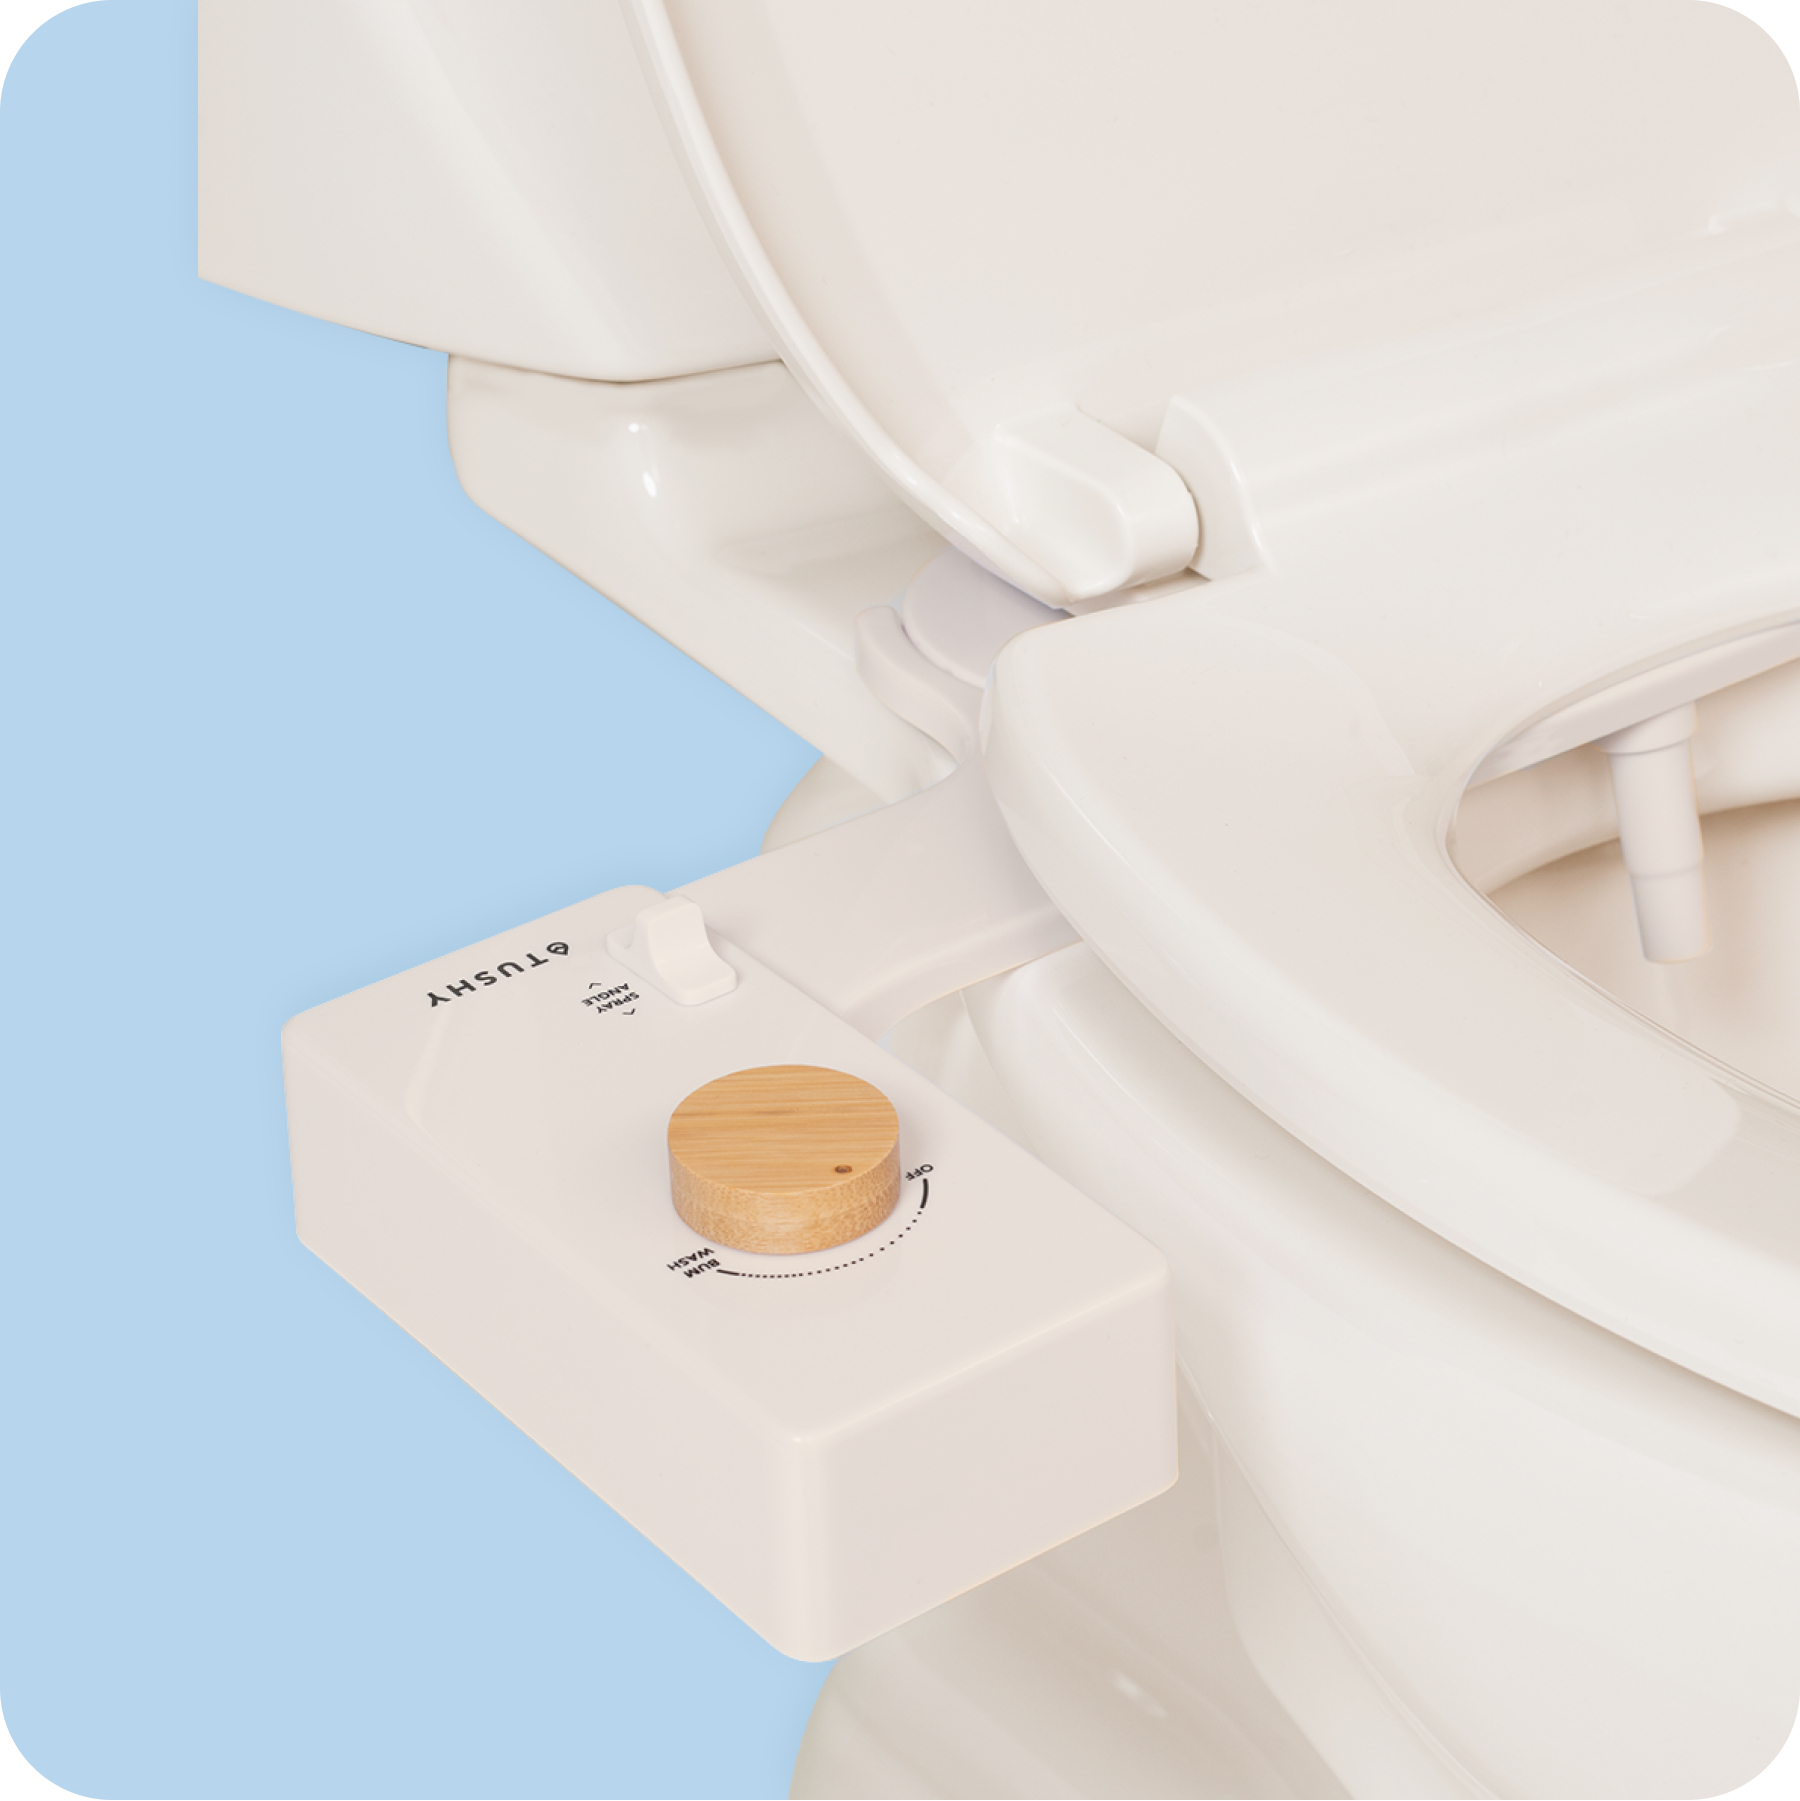 Tushy Classic 3.0 Biscuit/Bamboo - a classic affordable bidet attachment by TUSHY